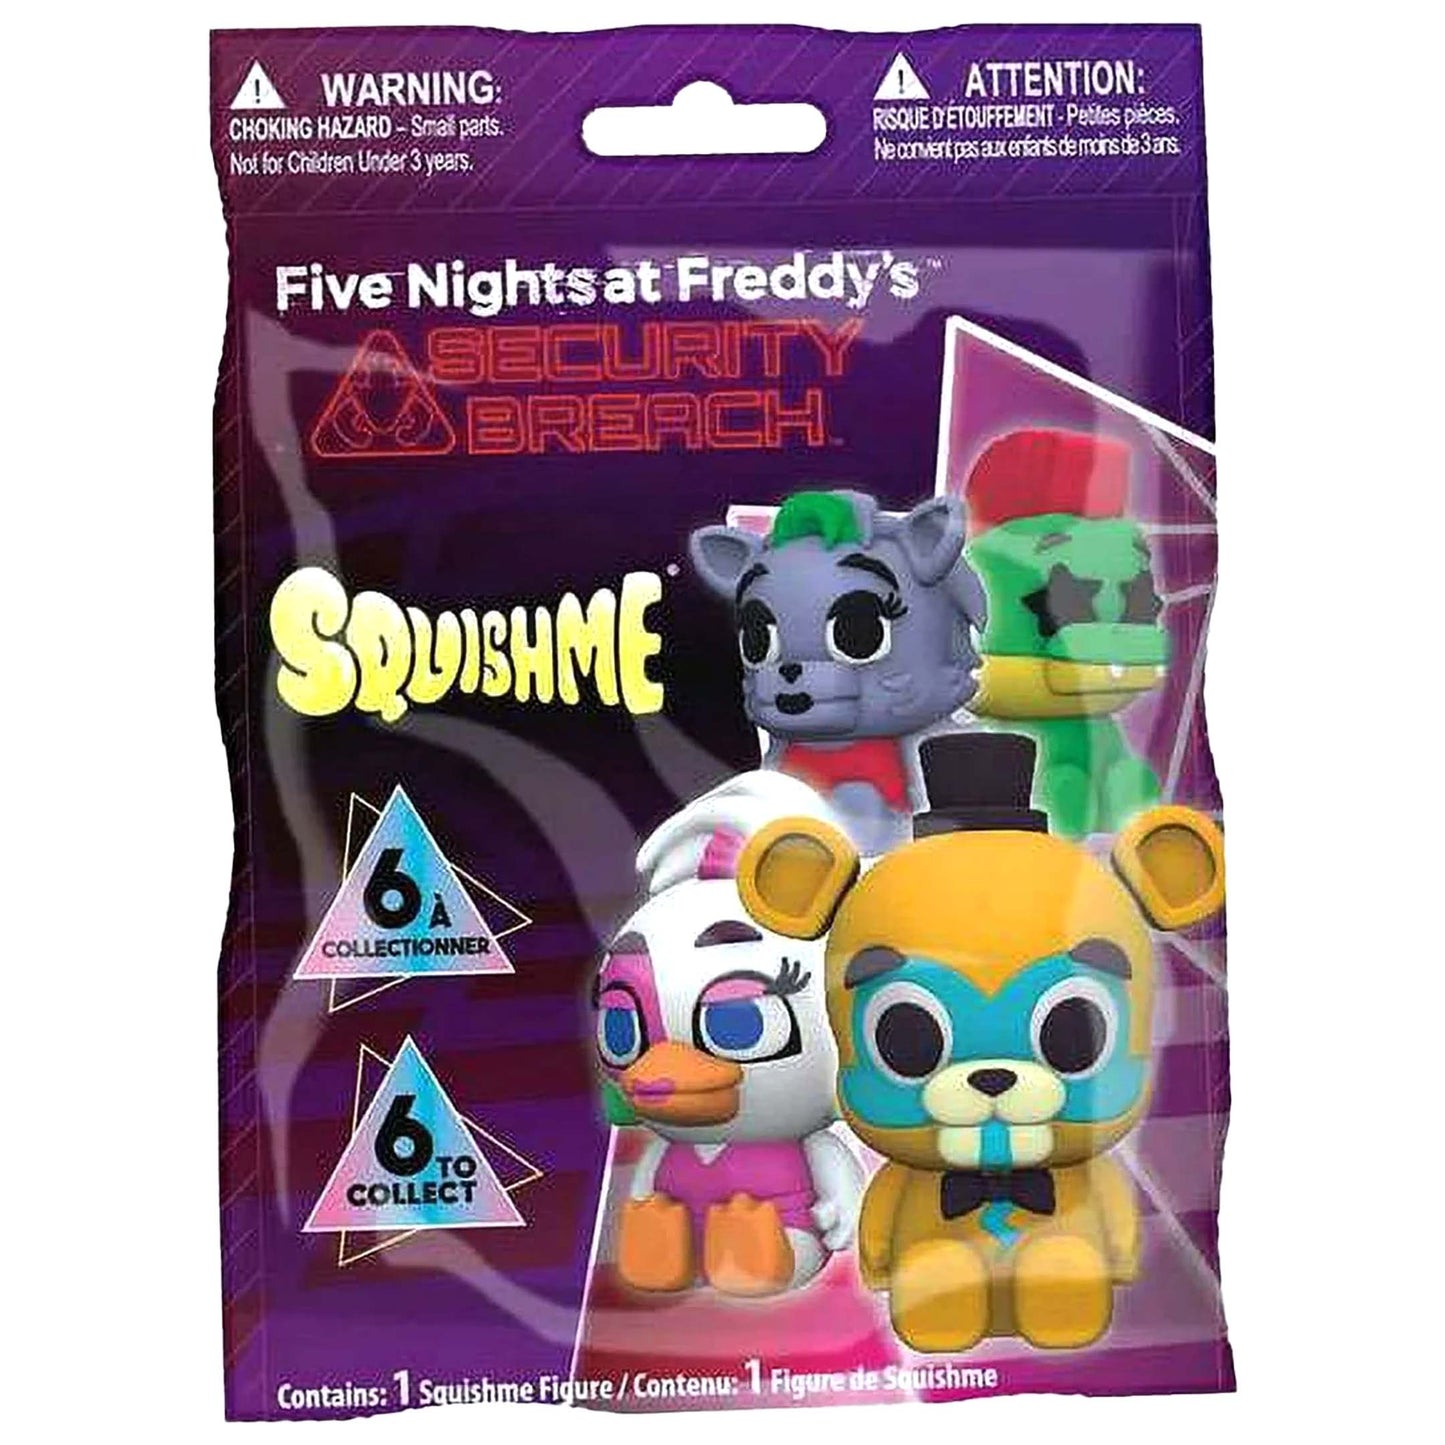 Five Nights at Freddys Security Breach SquishMe - Choose Yours